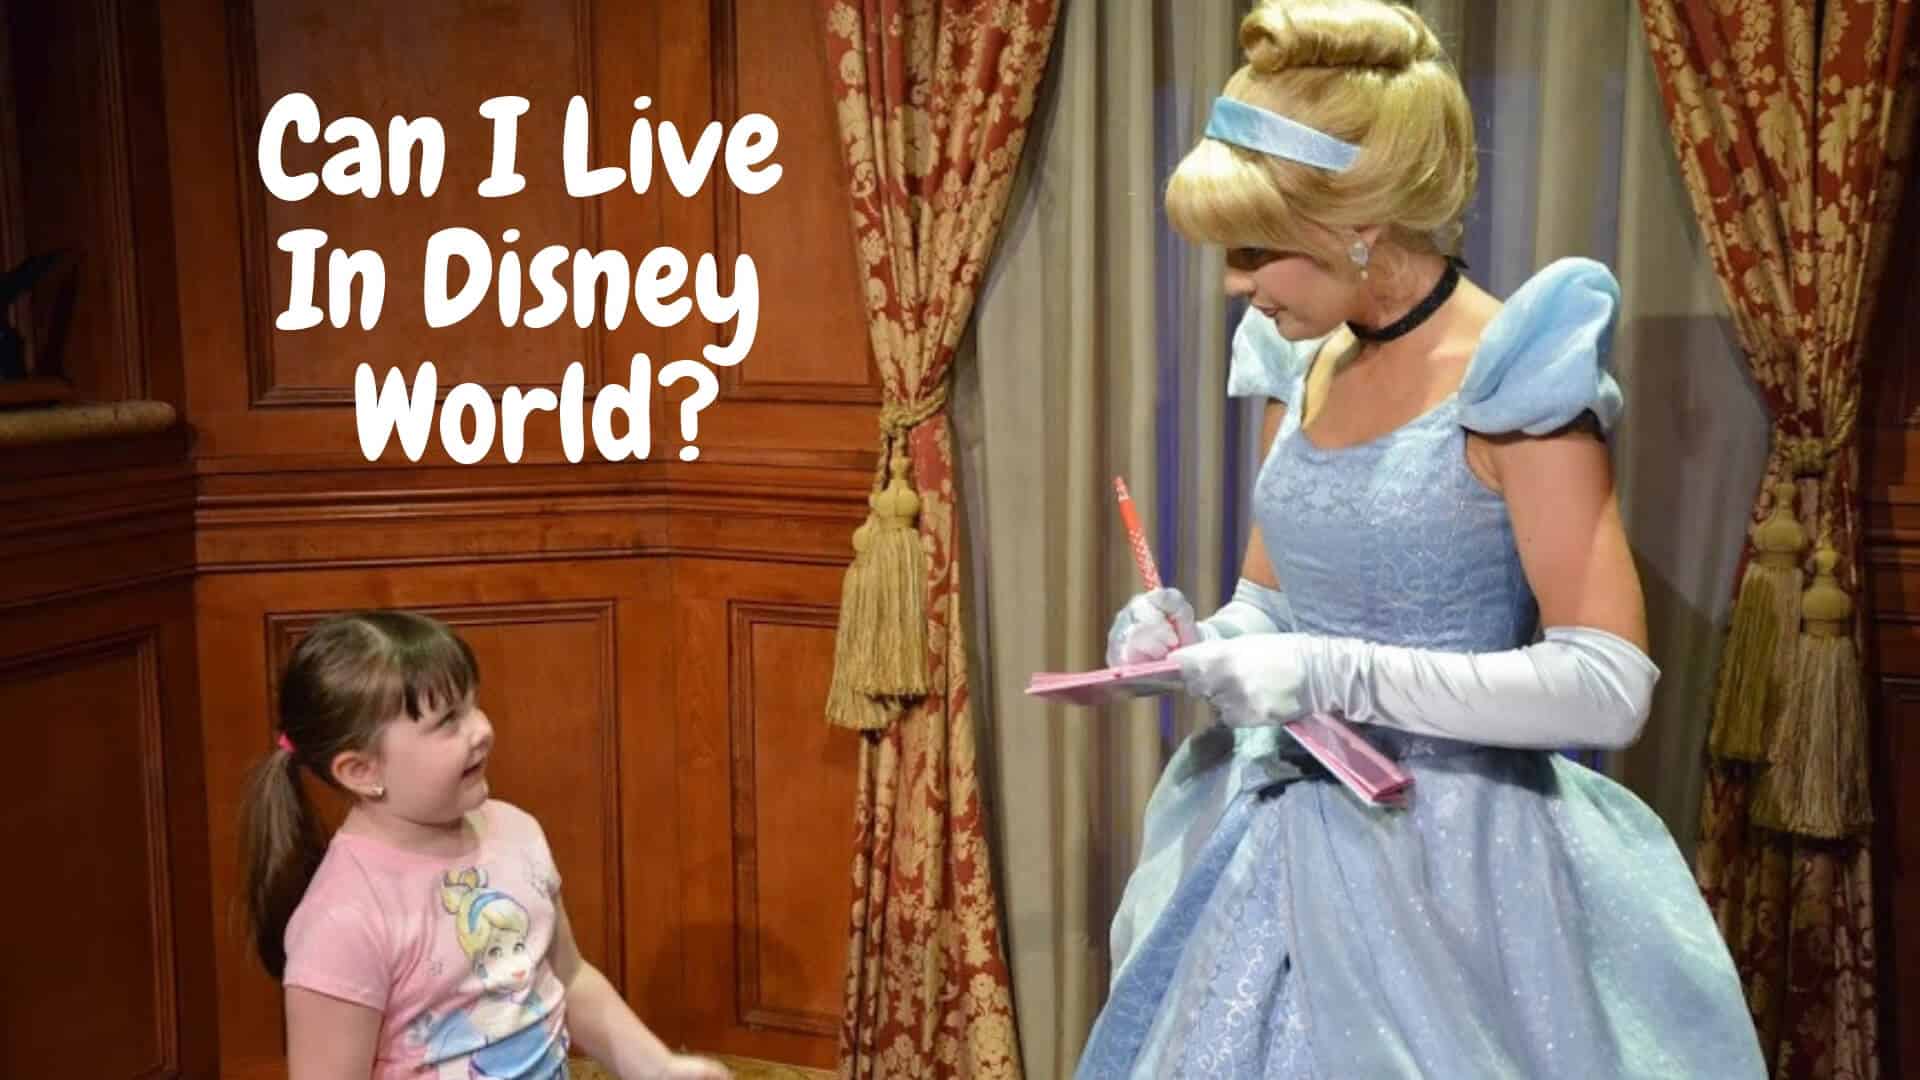 10 Top Secret Disney World Tips (Number 5 Is Awesome!) 46